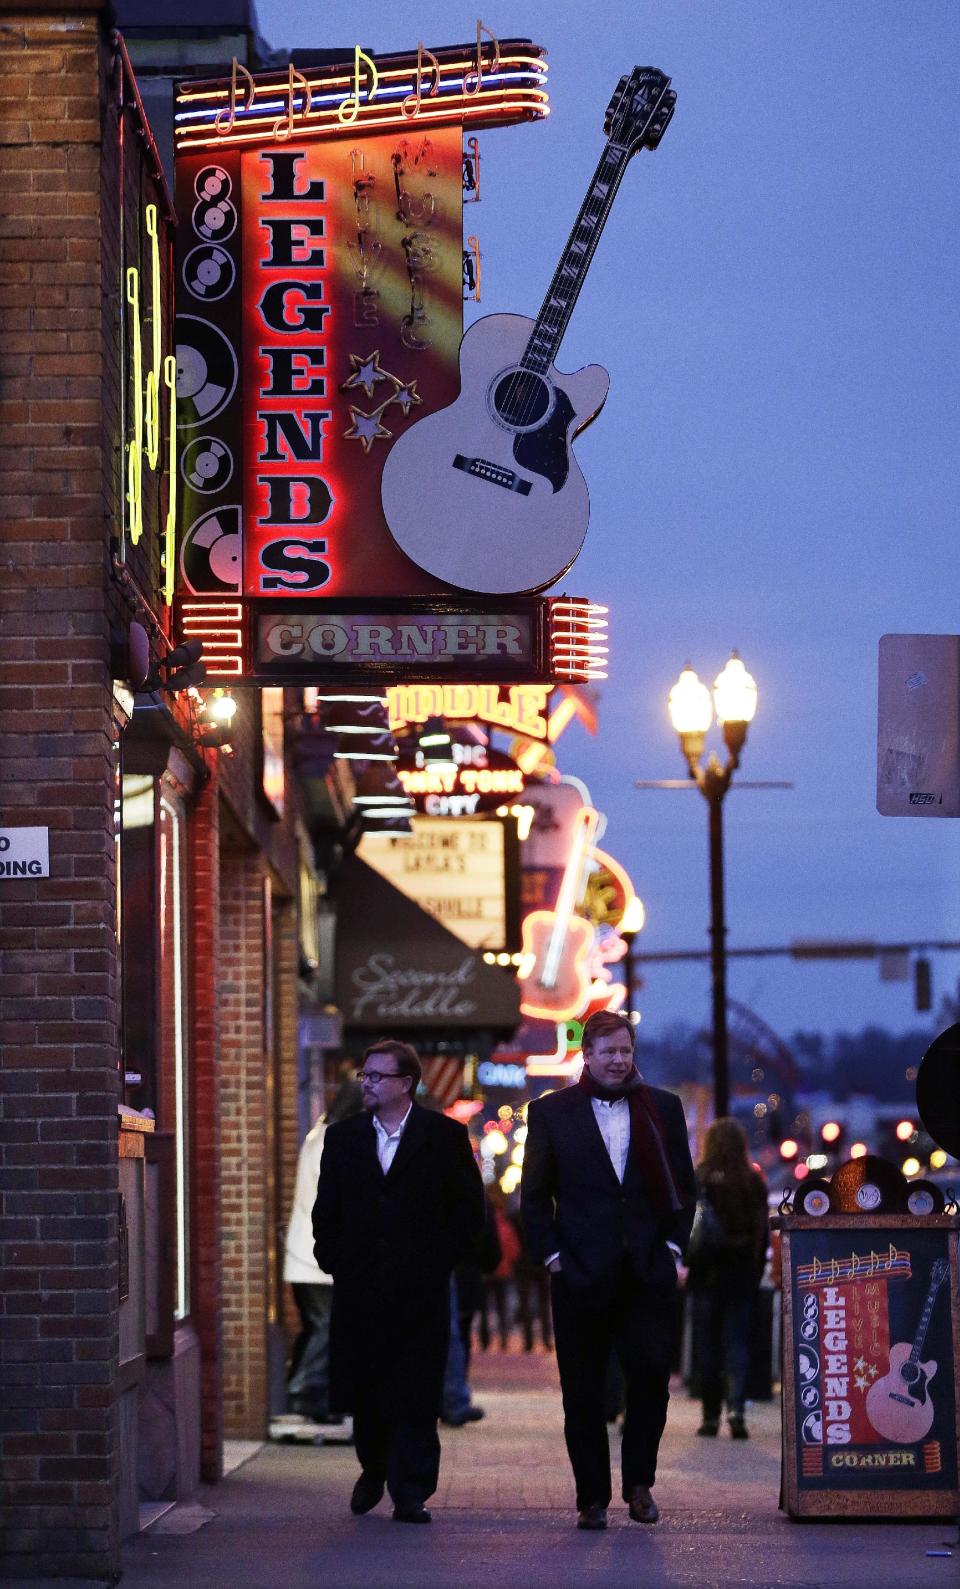 This Jan. 15, 2014 photo shows people walking past a row of bars on lower Broadway in Nashville, Tenn. Live music can be heard every night of the week in the street's honky-tonks and bars. (AP Photo/Mark Humphrey)